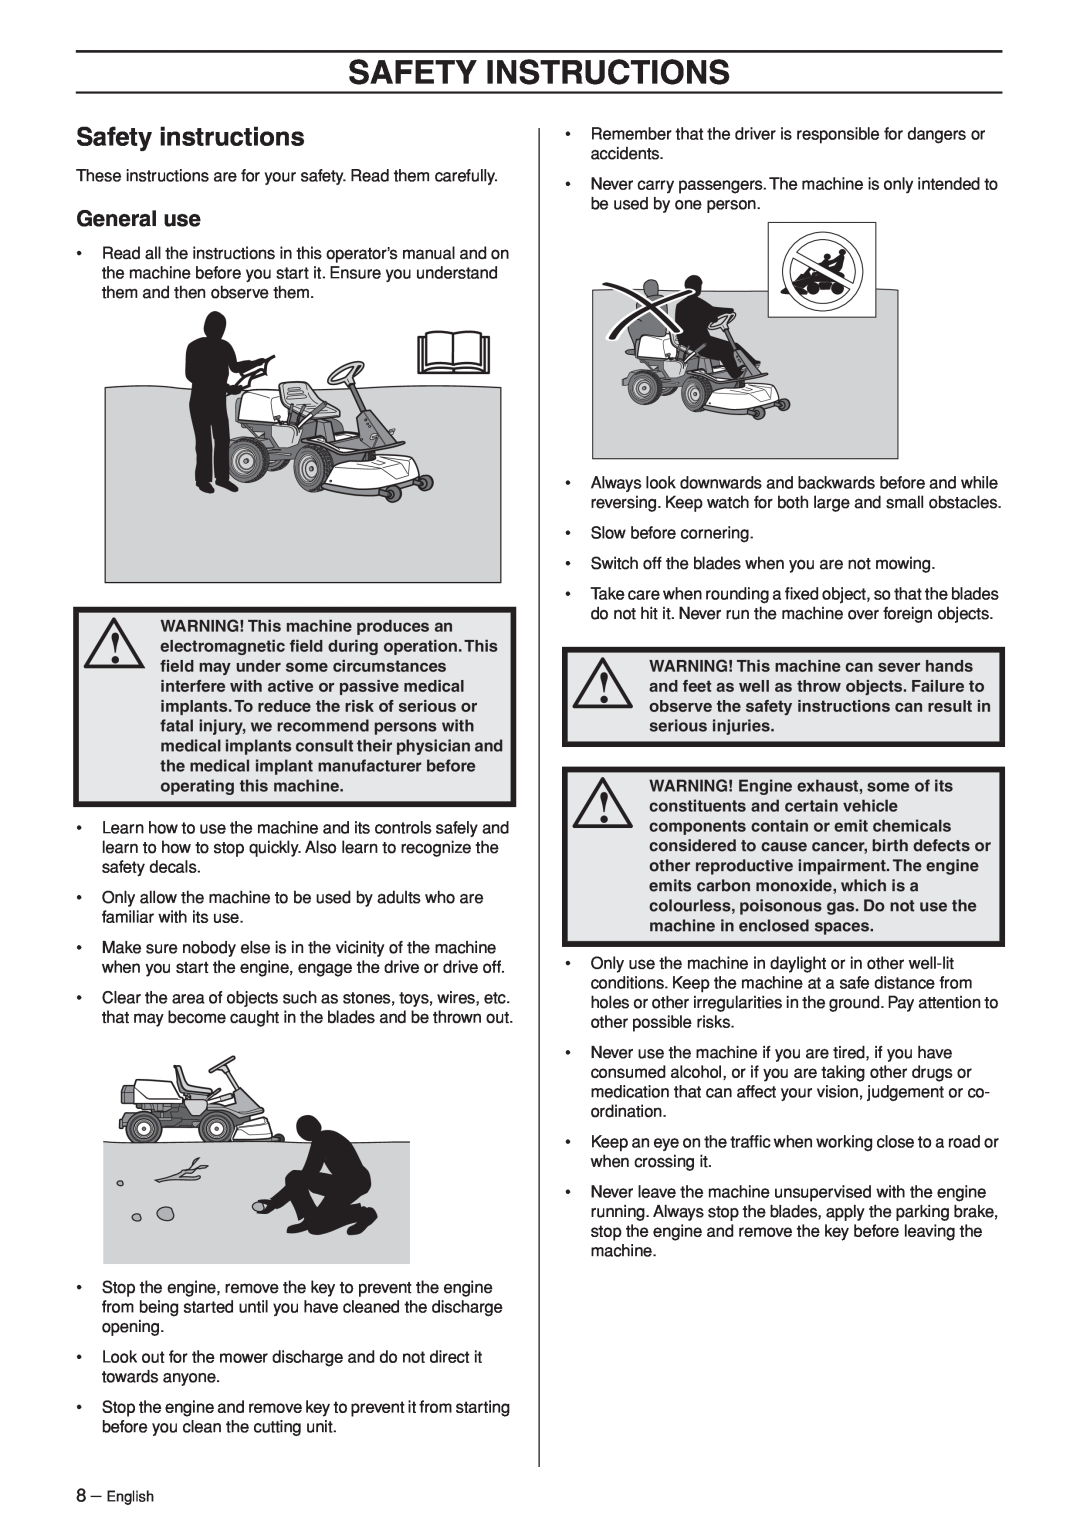 Husqvarna R120S Safety Instructions, Safety instructions, General use, WARNING! This machine produces an, serious injuries 